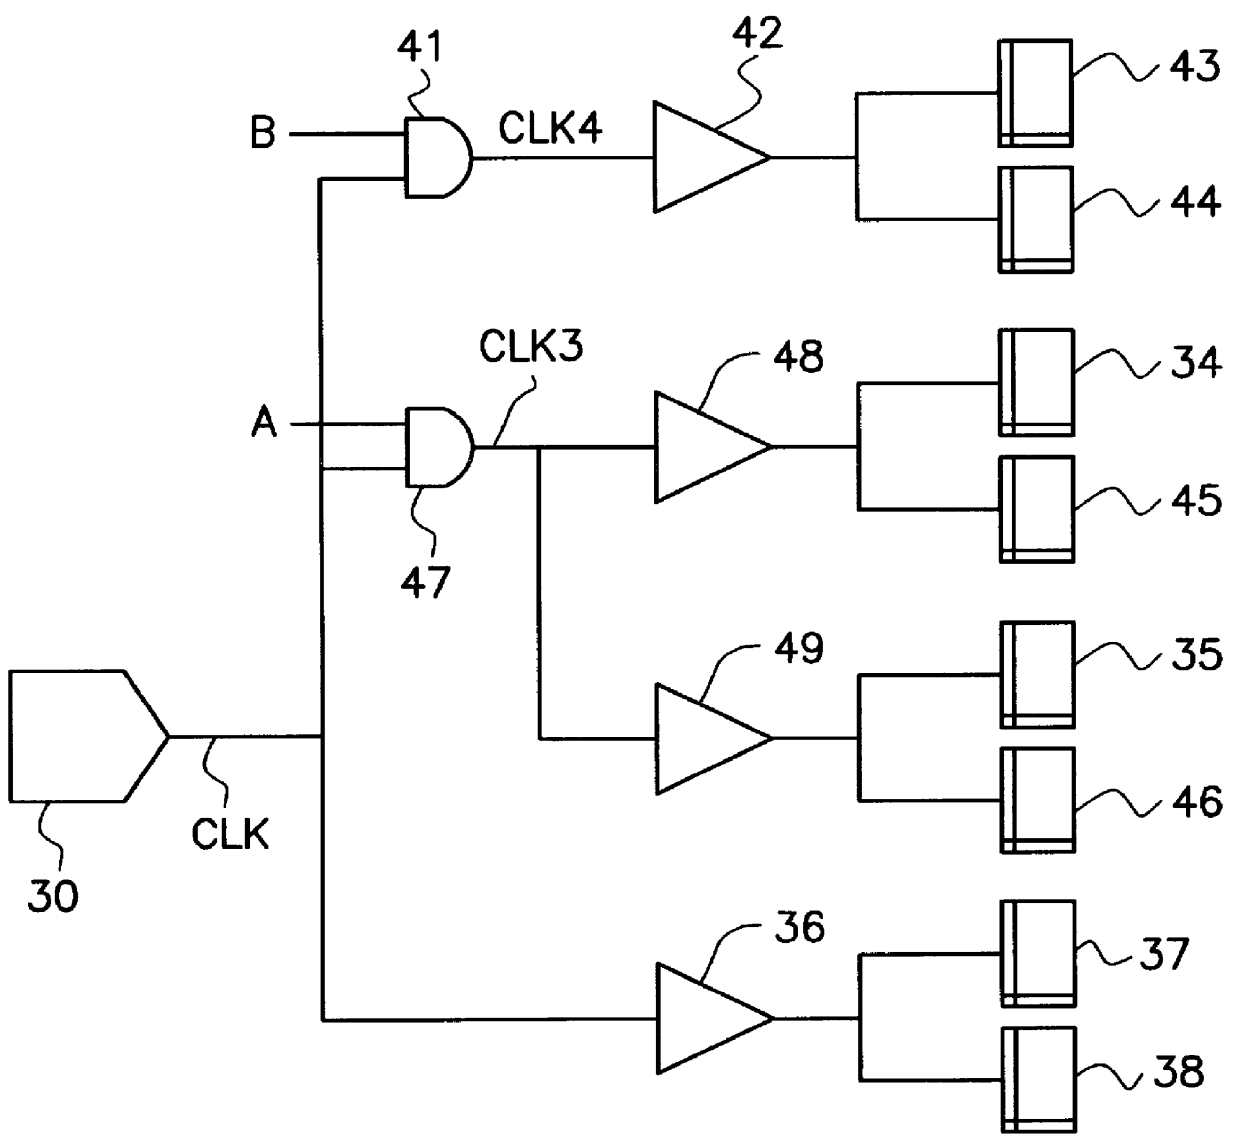 Gated clock tree synthesis method for the logic design